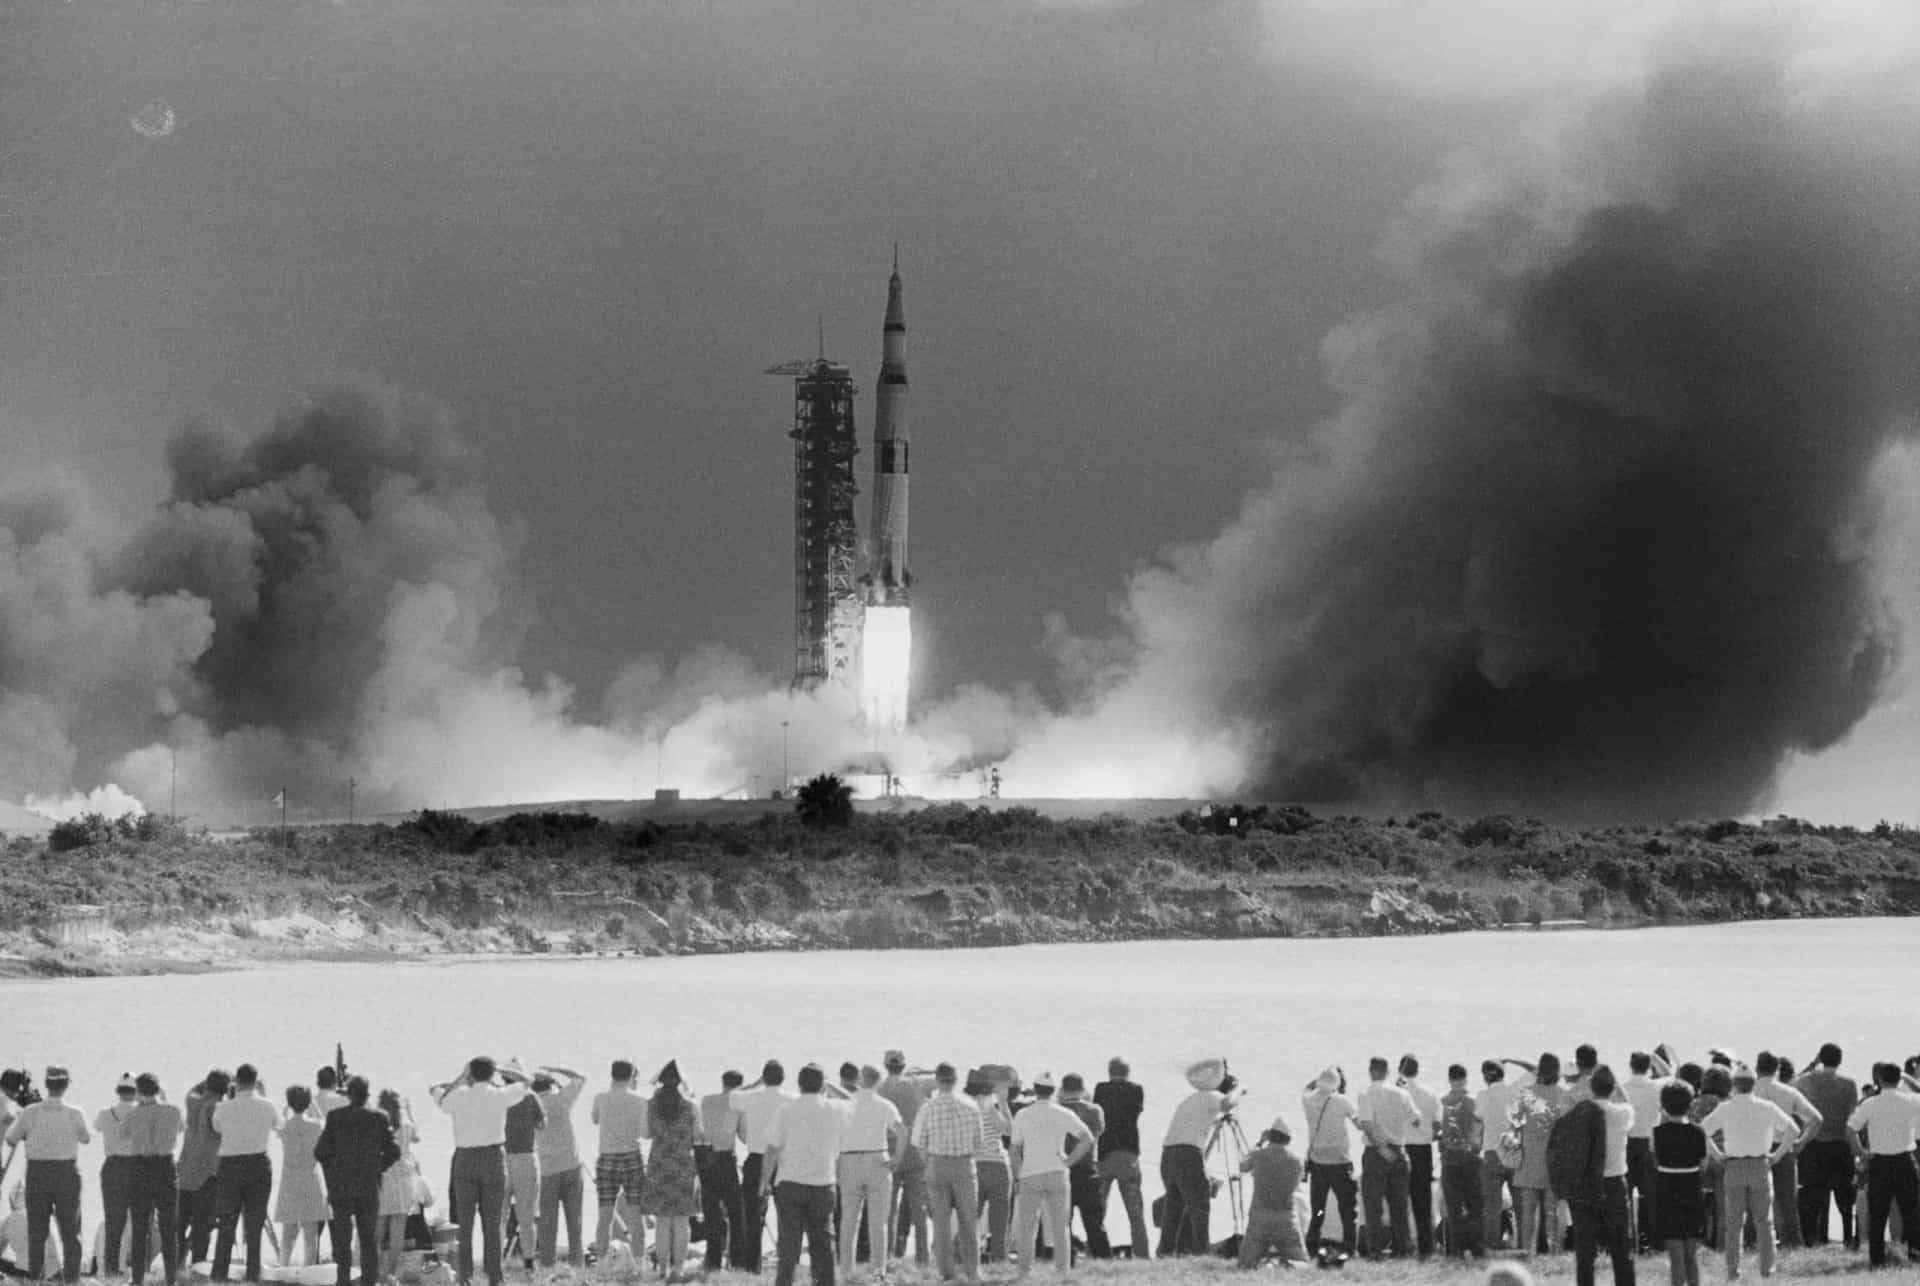 <p>Thousands of people witnessed the launch of the Apollo 11 mission at Cocoa Beach, Florida. The John F. Kennedy Space Center, which opened in 1962, paved the way for the area to become a hotspot for anyone curious about space. </p>